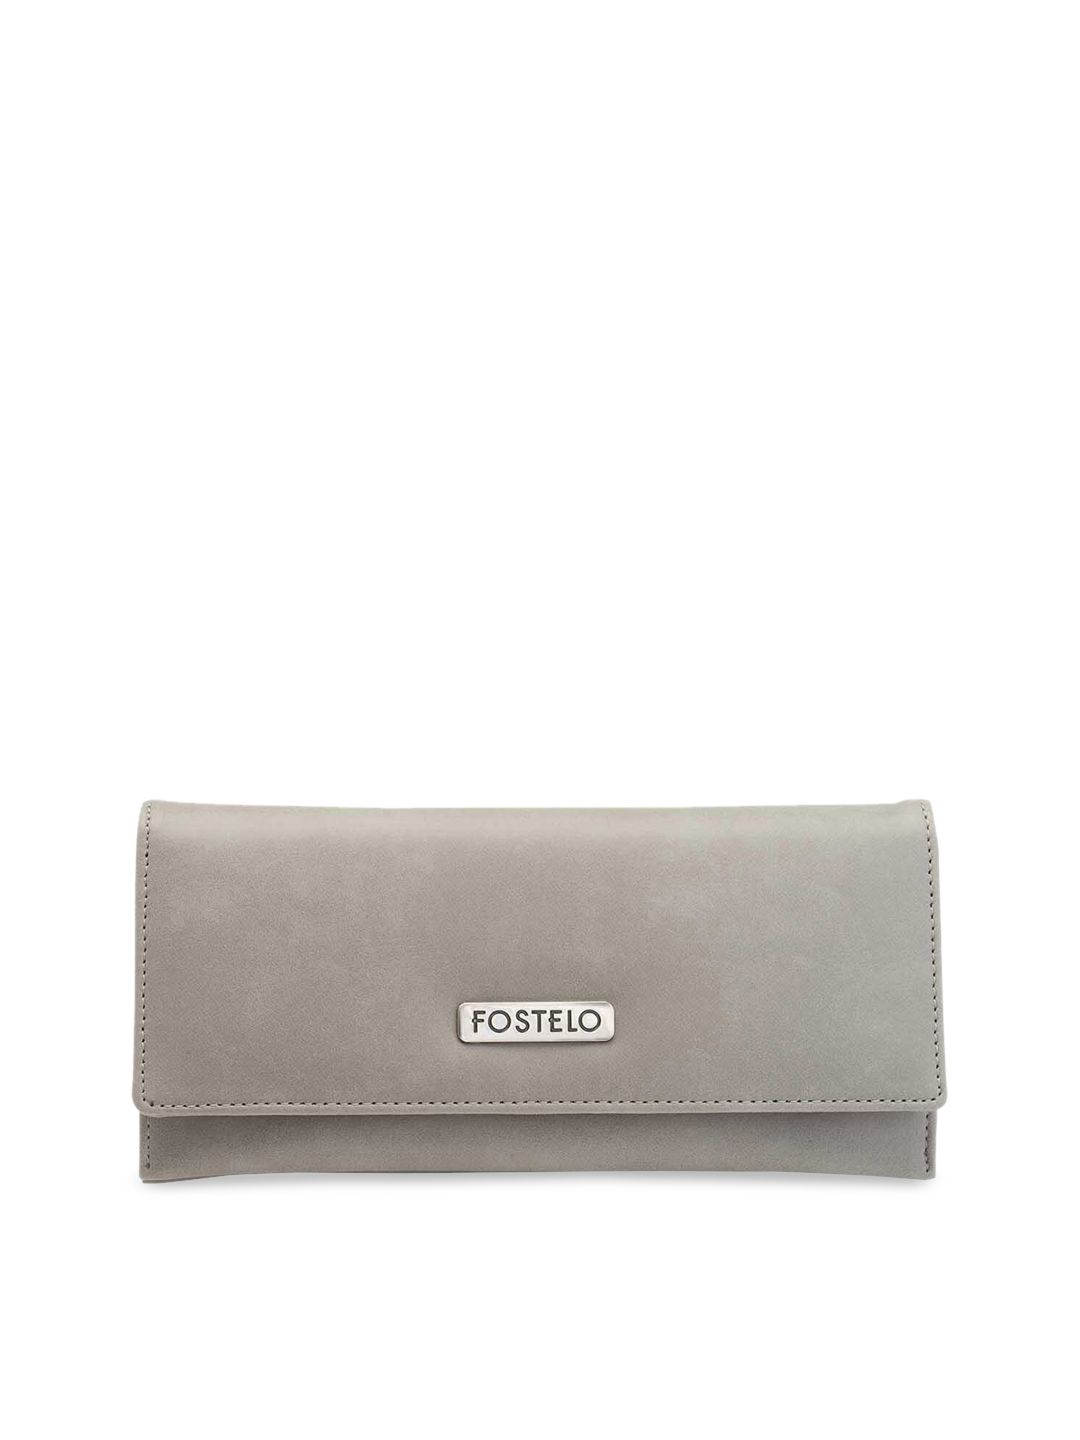 Fostelo Women Grey Solid Two Fold Wallet Price in India